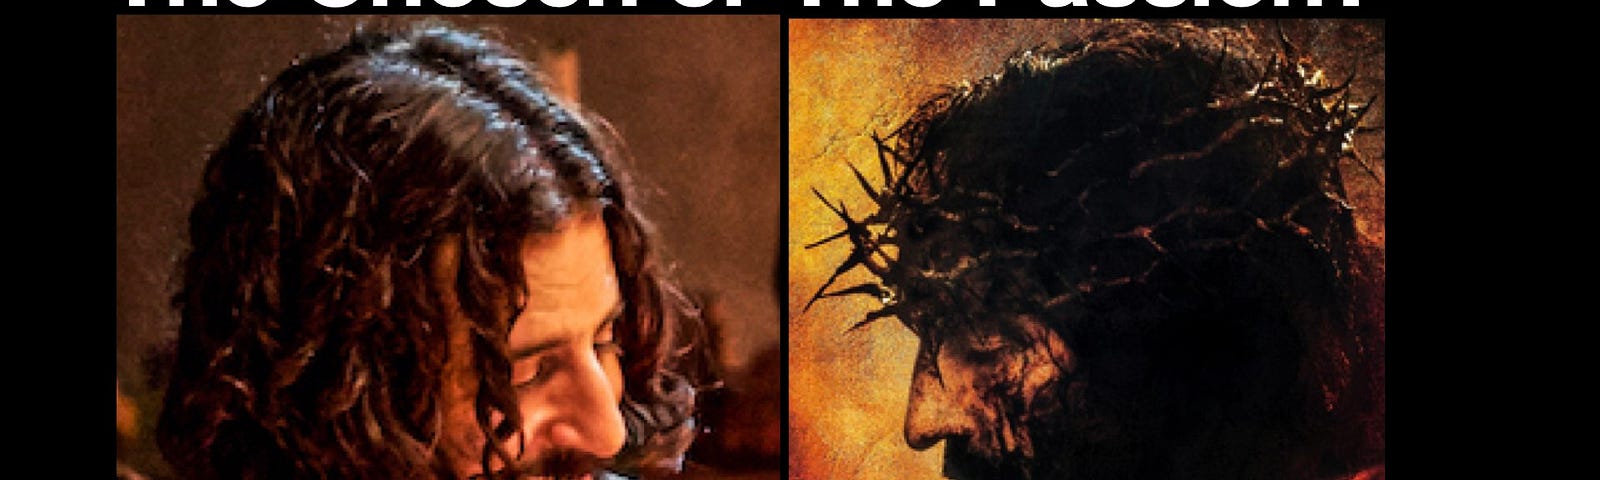 Above: The Chosen or The Passion? The Chosen (left, starring Jonathan Roumie as Jesus Christ) is an ongoing TV series about Jesus’s life, while The Passion of the Christ (right, starring Jim Caviezel as Jesus Christ) is a record-breaking film about the last 12 hours of his life that debuted in 2004. Which is better? Which should you watch during Holy Week? Publicity images courtesy press.thechosen.tv and Wikimedia Commons.